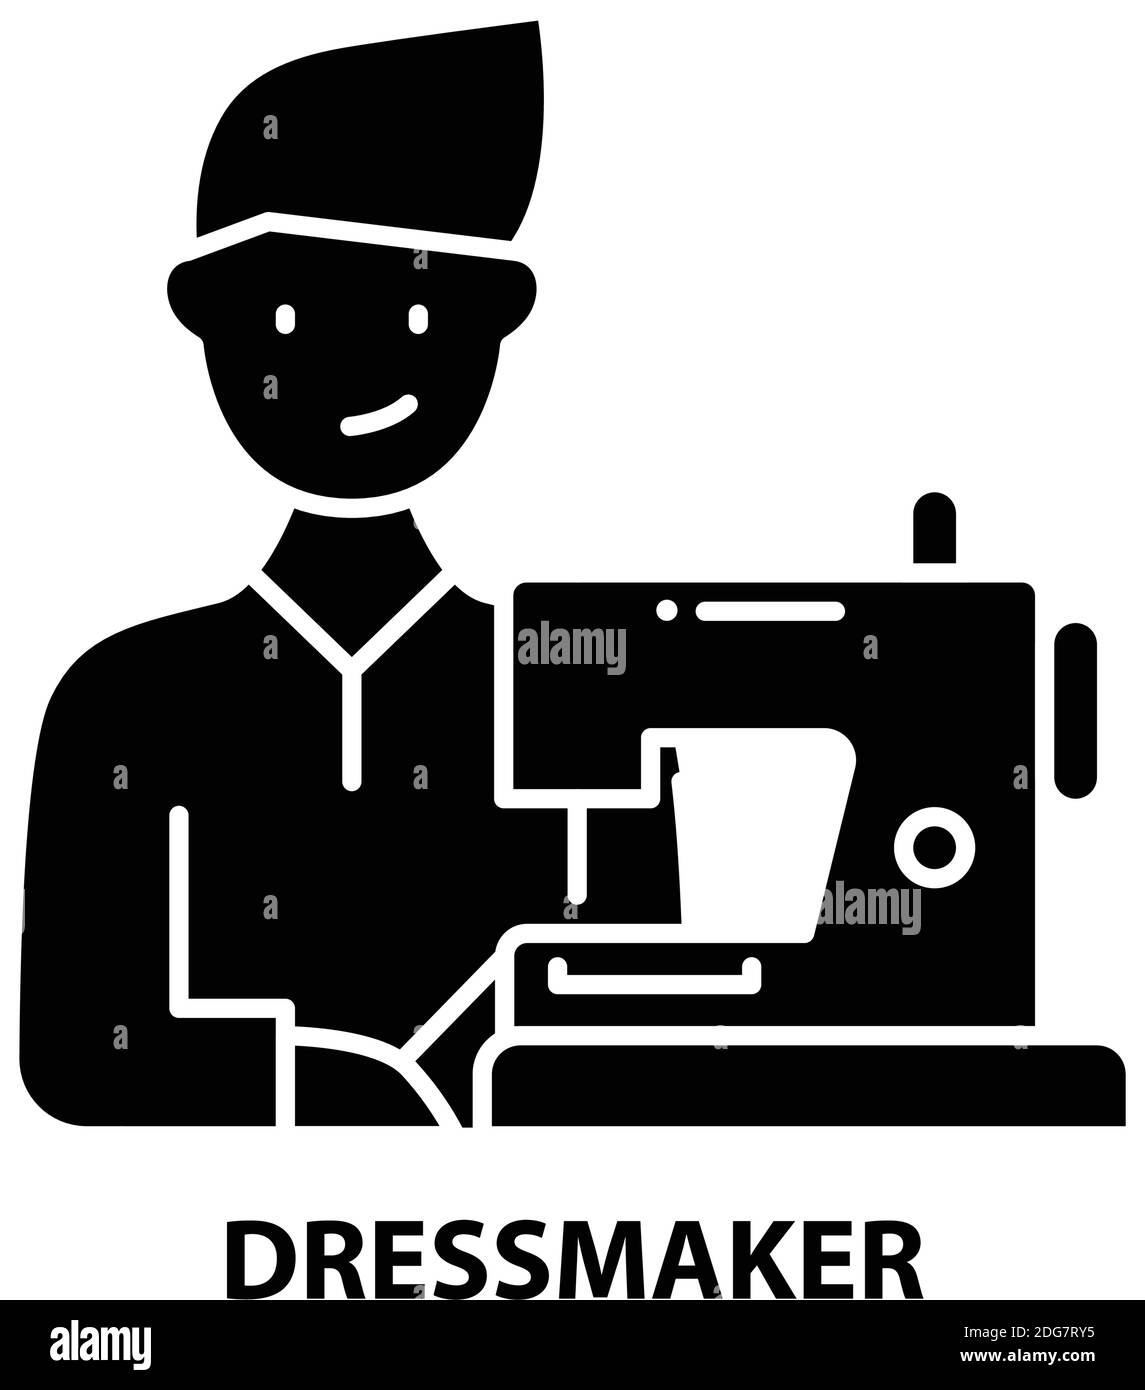 Dressmaker Images – Browse 220,906 Stock Photos, Vectors, and